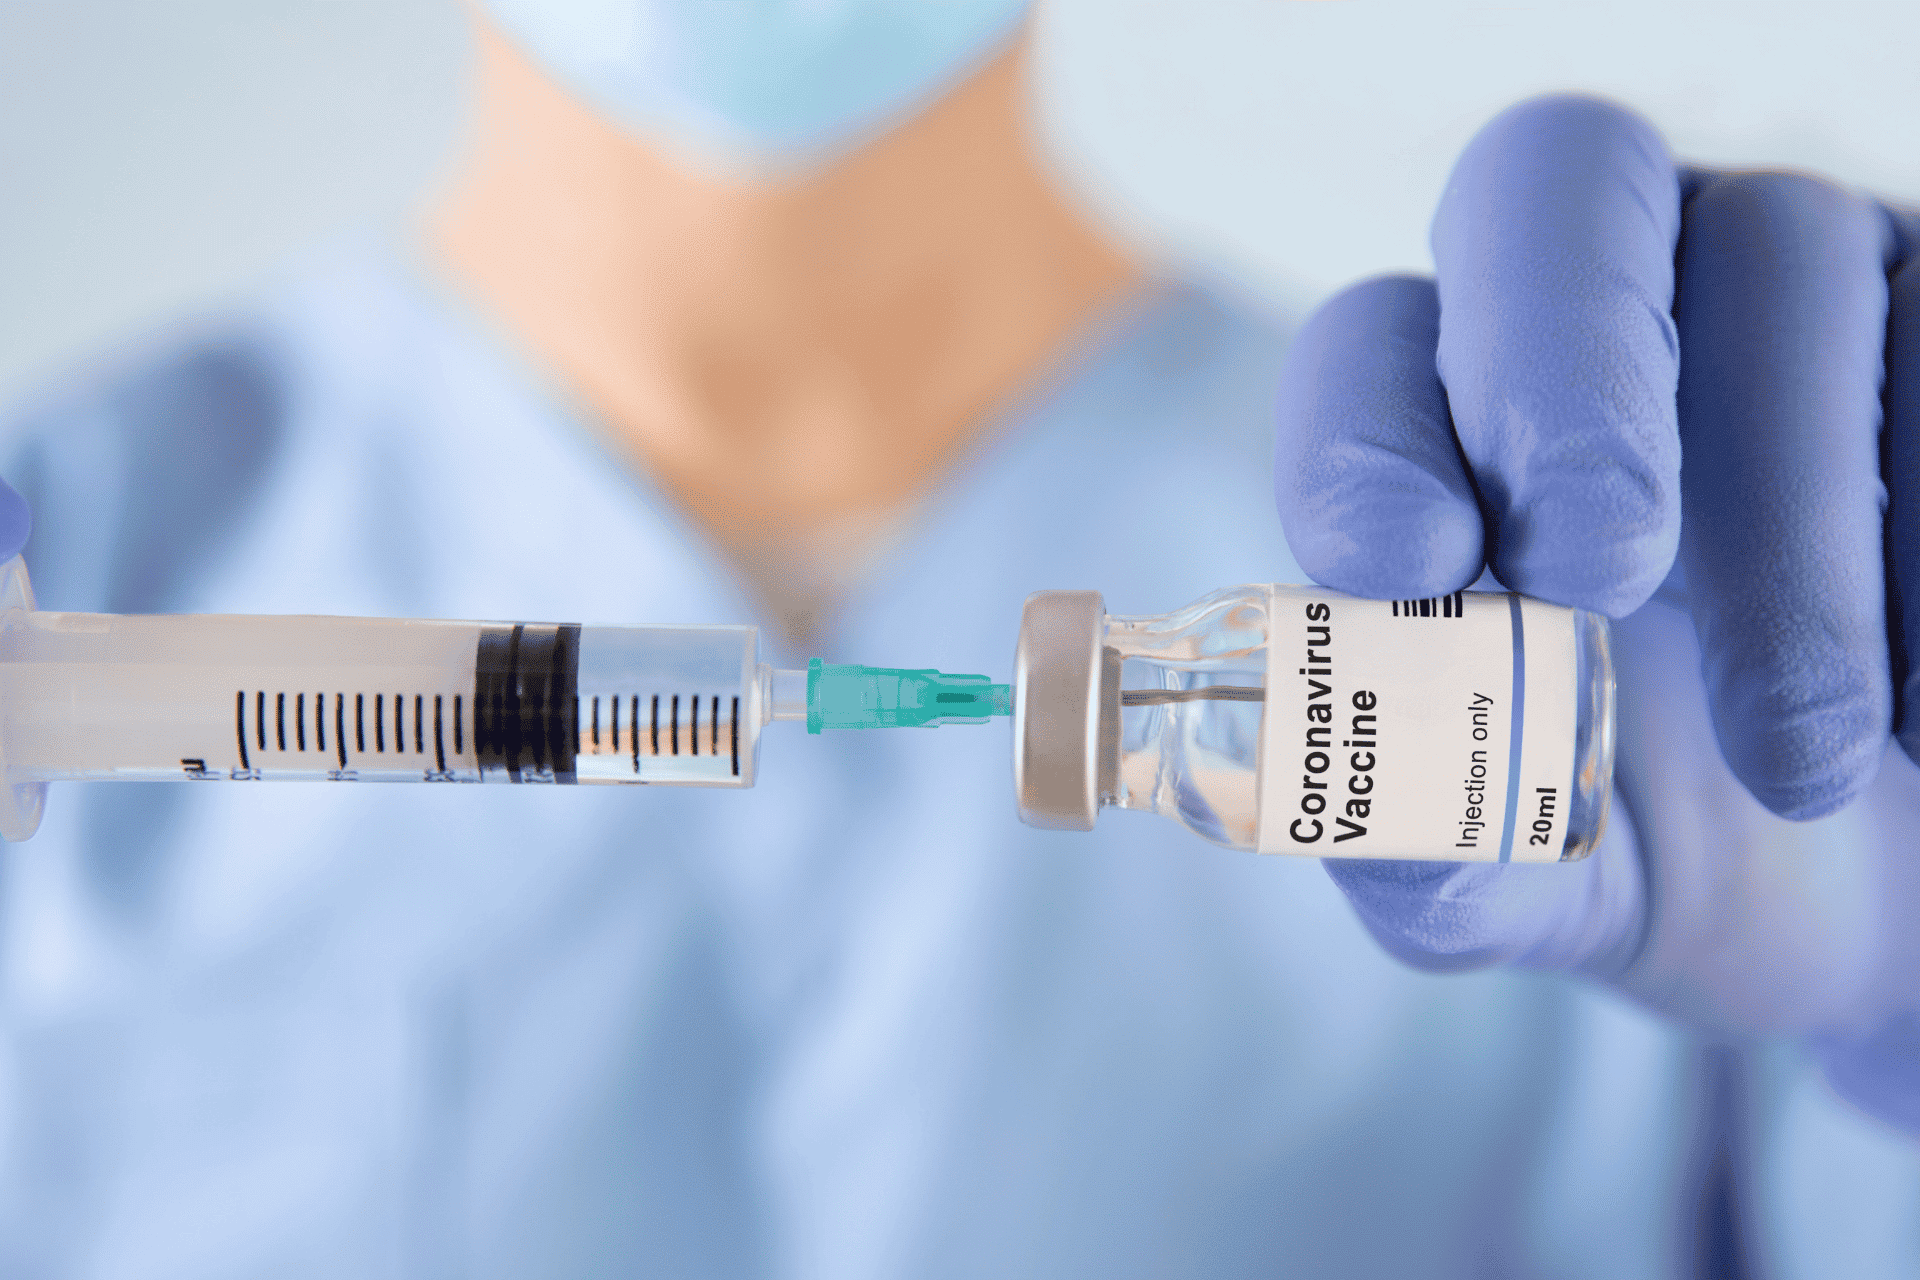 COVID-19 Vaccine: What Do We Know So Far?